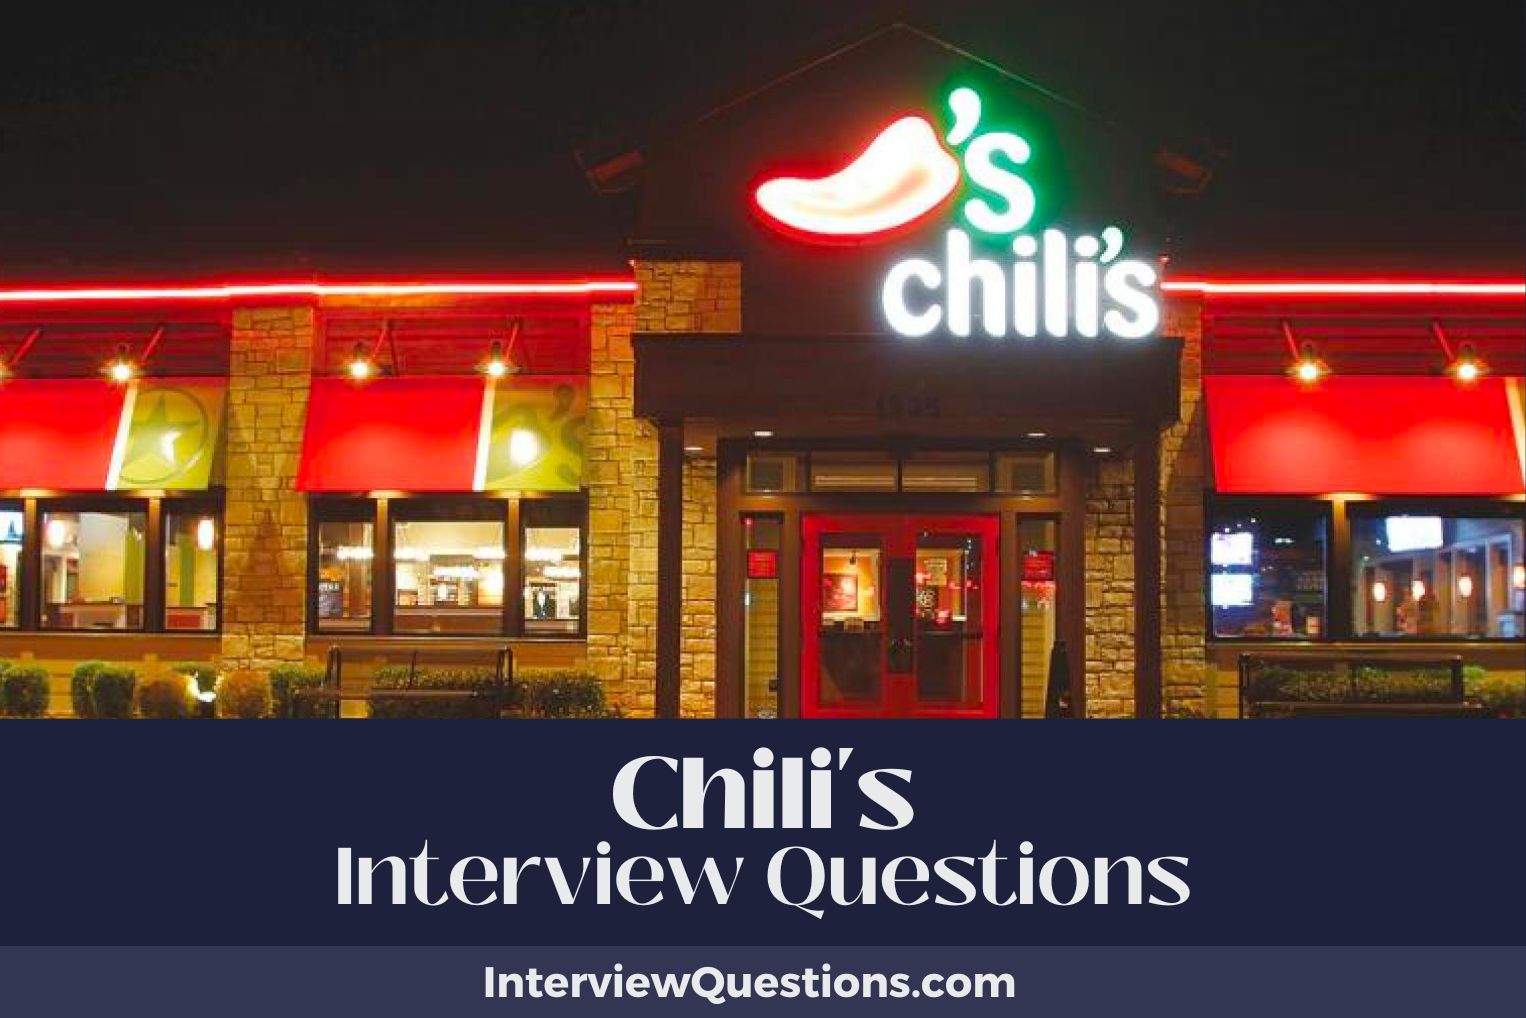 Chili's Interview Questions